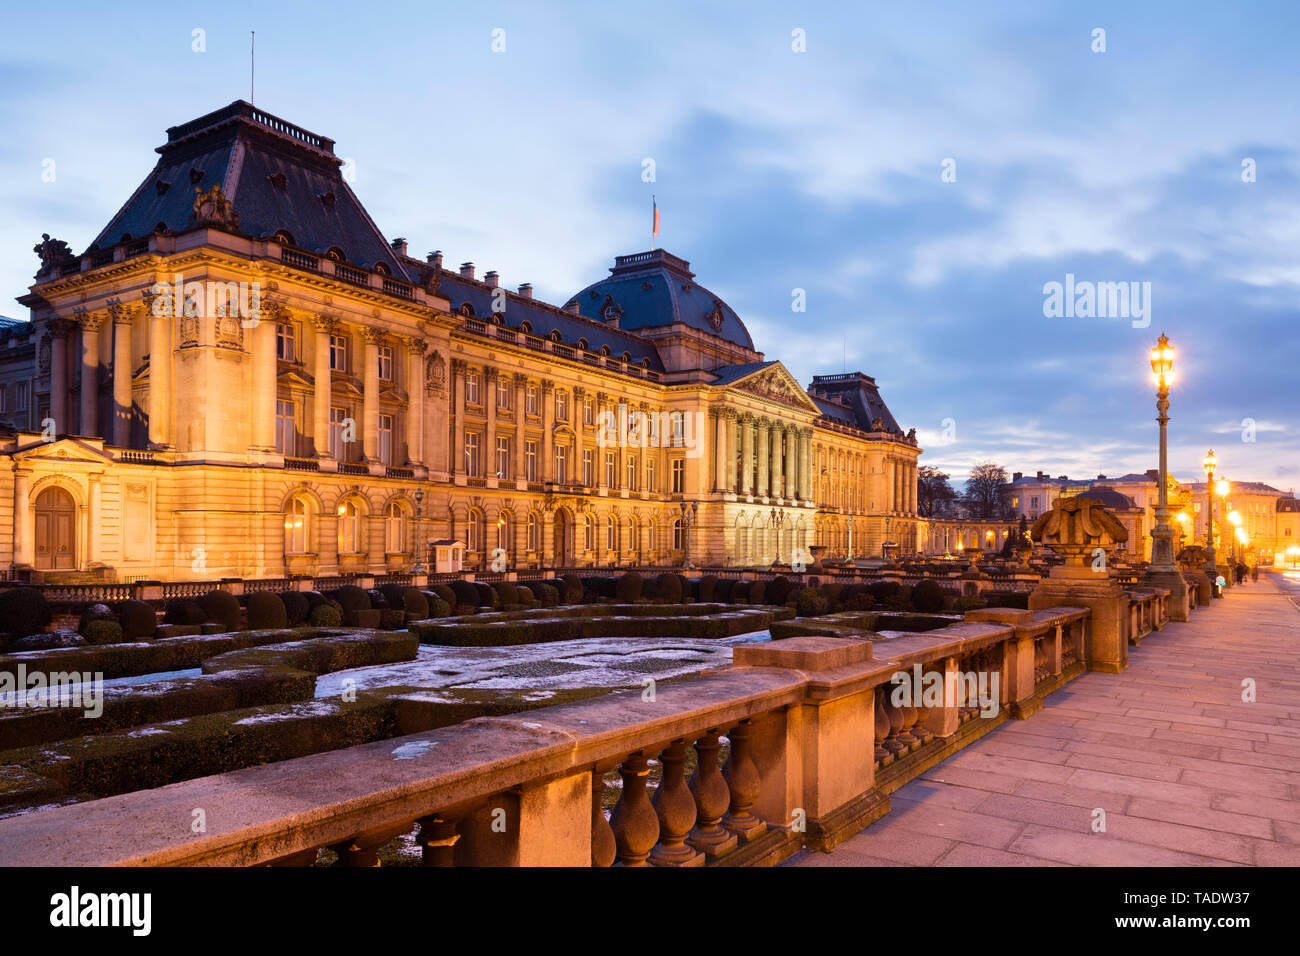 Belgium, Brussels, Royal Palace of Brussels in the evening Stock Photo